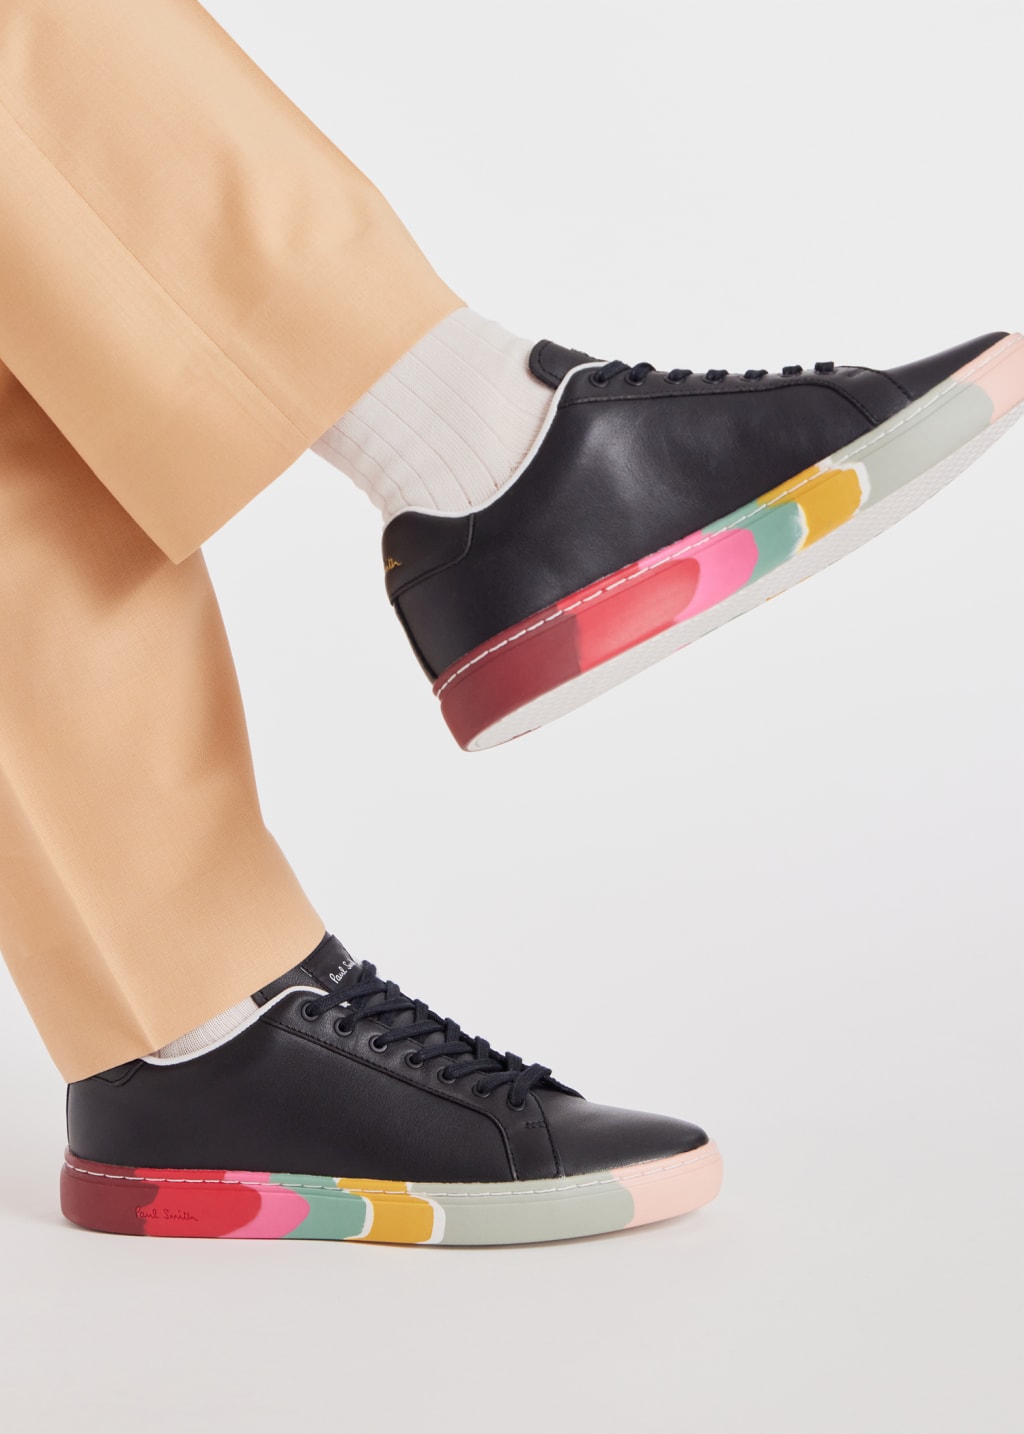 Model View - Women's Black Leather 'Lapin' Swirl Trainers by Paul Smith